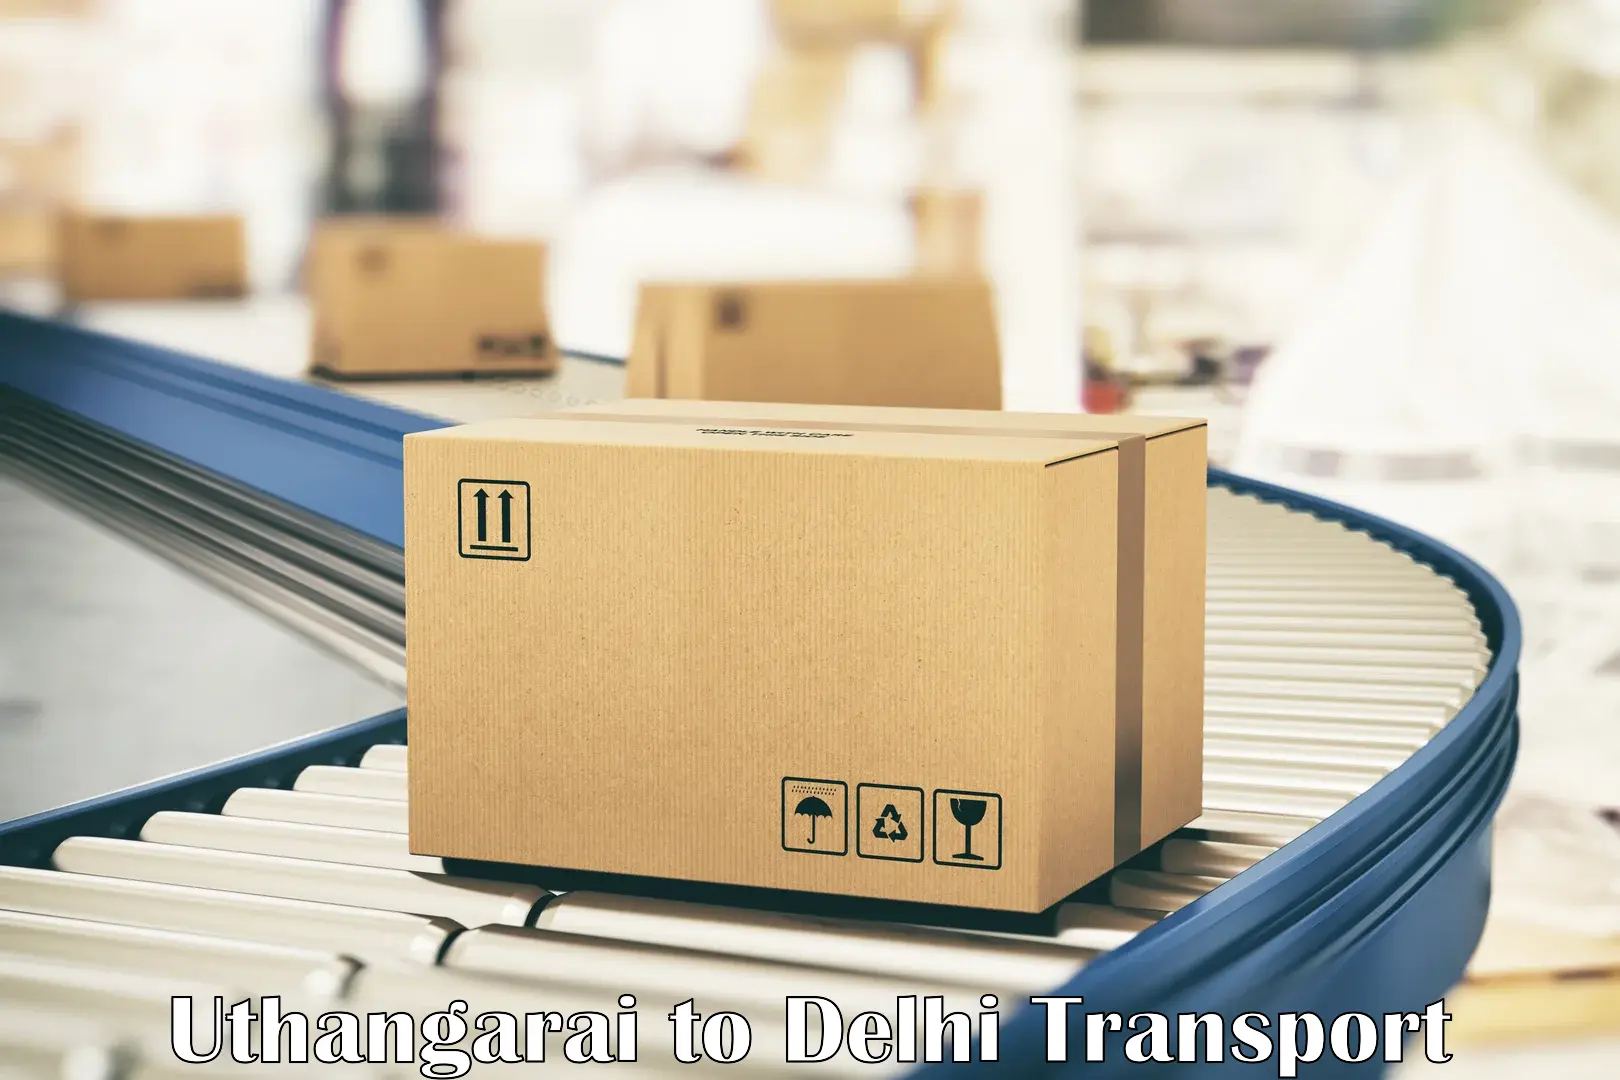 Container transportation services in Uthangarai to Delhi